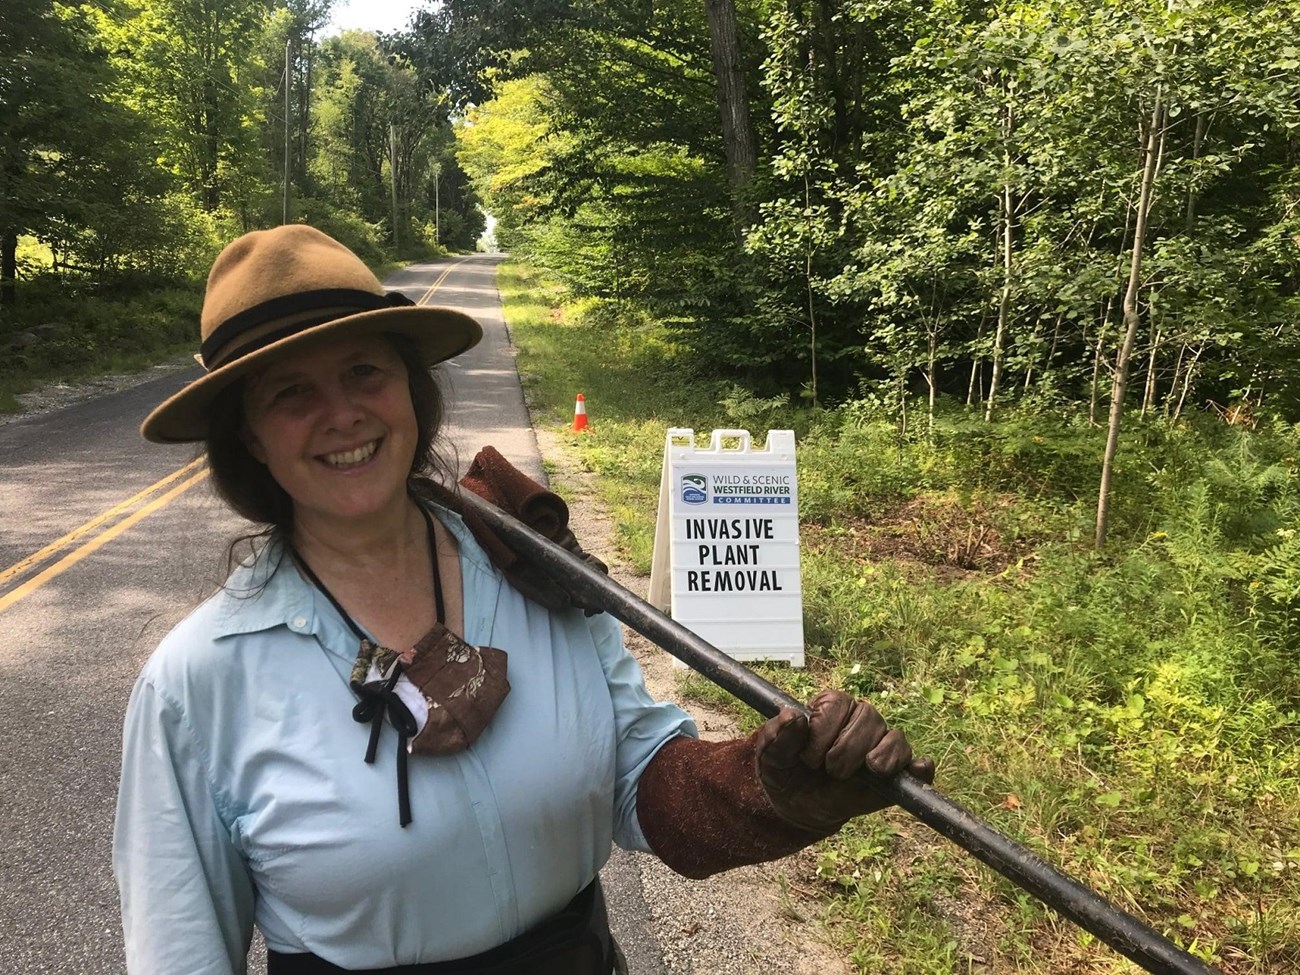 Meredyth Babcock is all smiles after a day of hard work removing invasive plants. These types of workdays are important so that native plants are not outcompeted by invasive species. Photo Credit: Westfield Wild and Scenic River Facebook page.